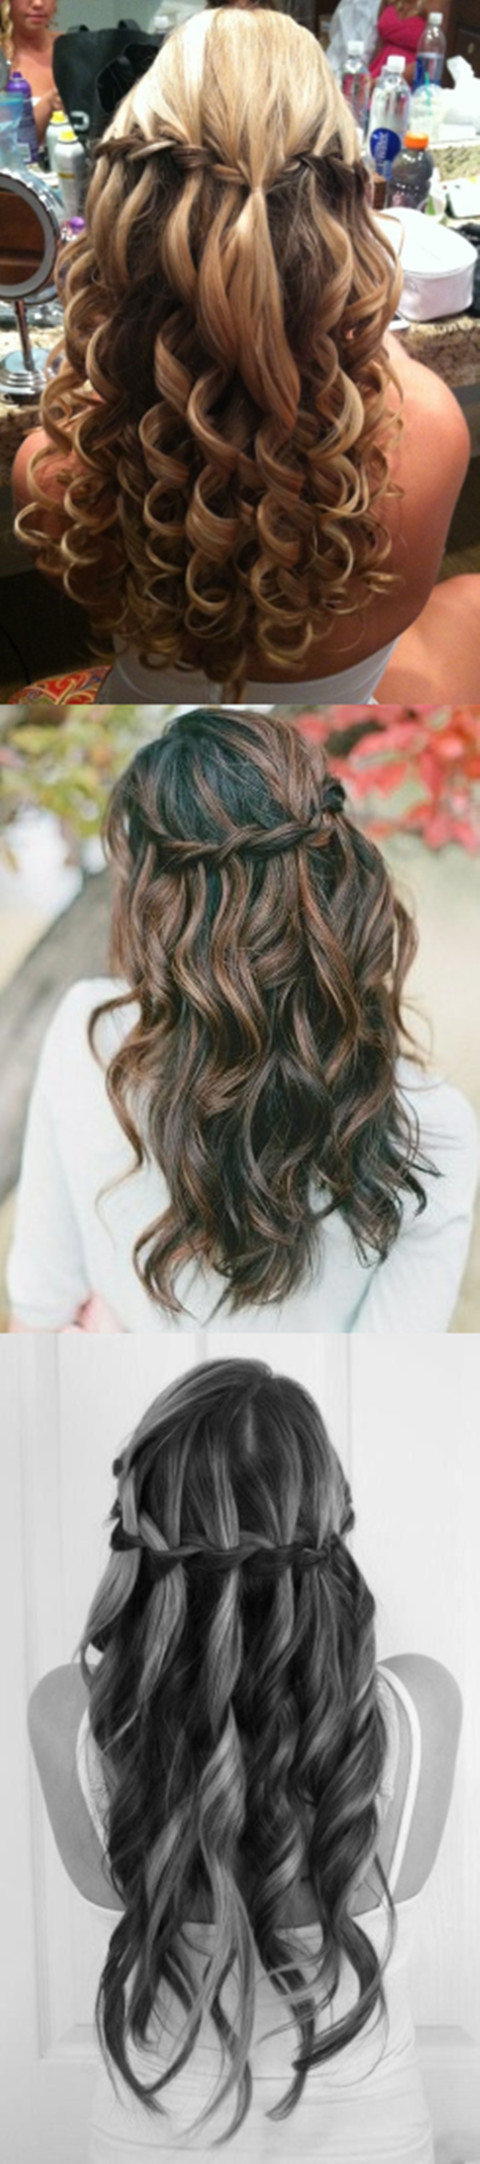 Waterfall Hairstyles for 2014 Proms